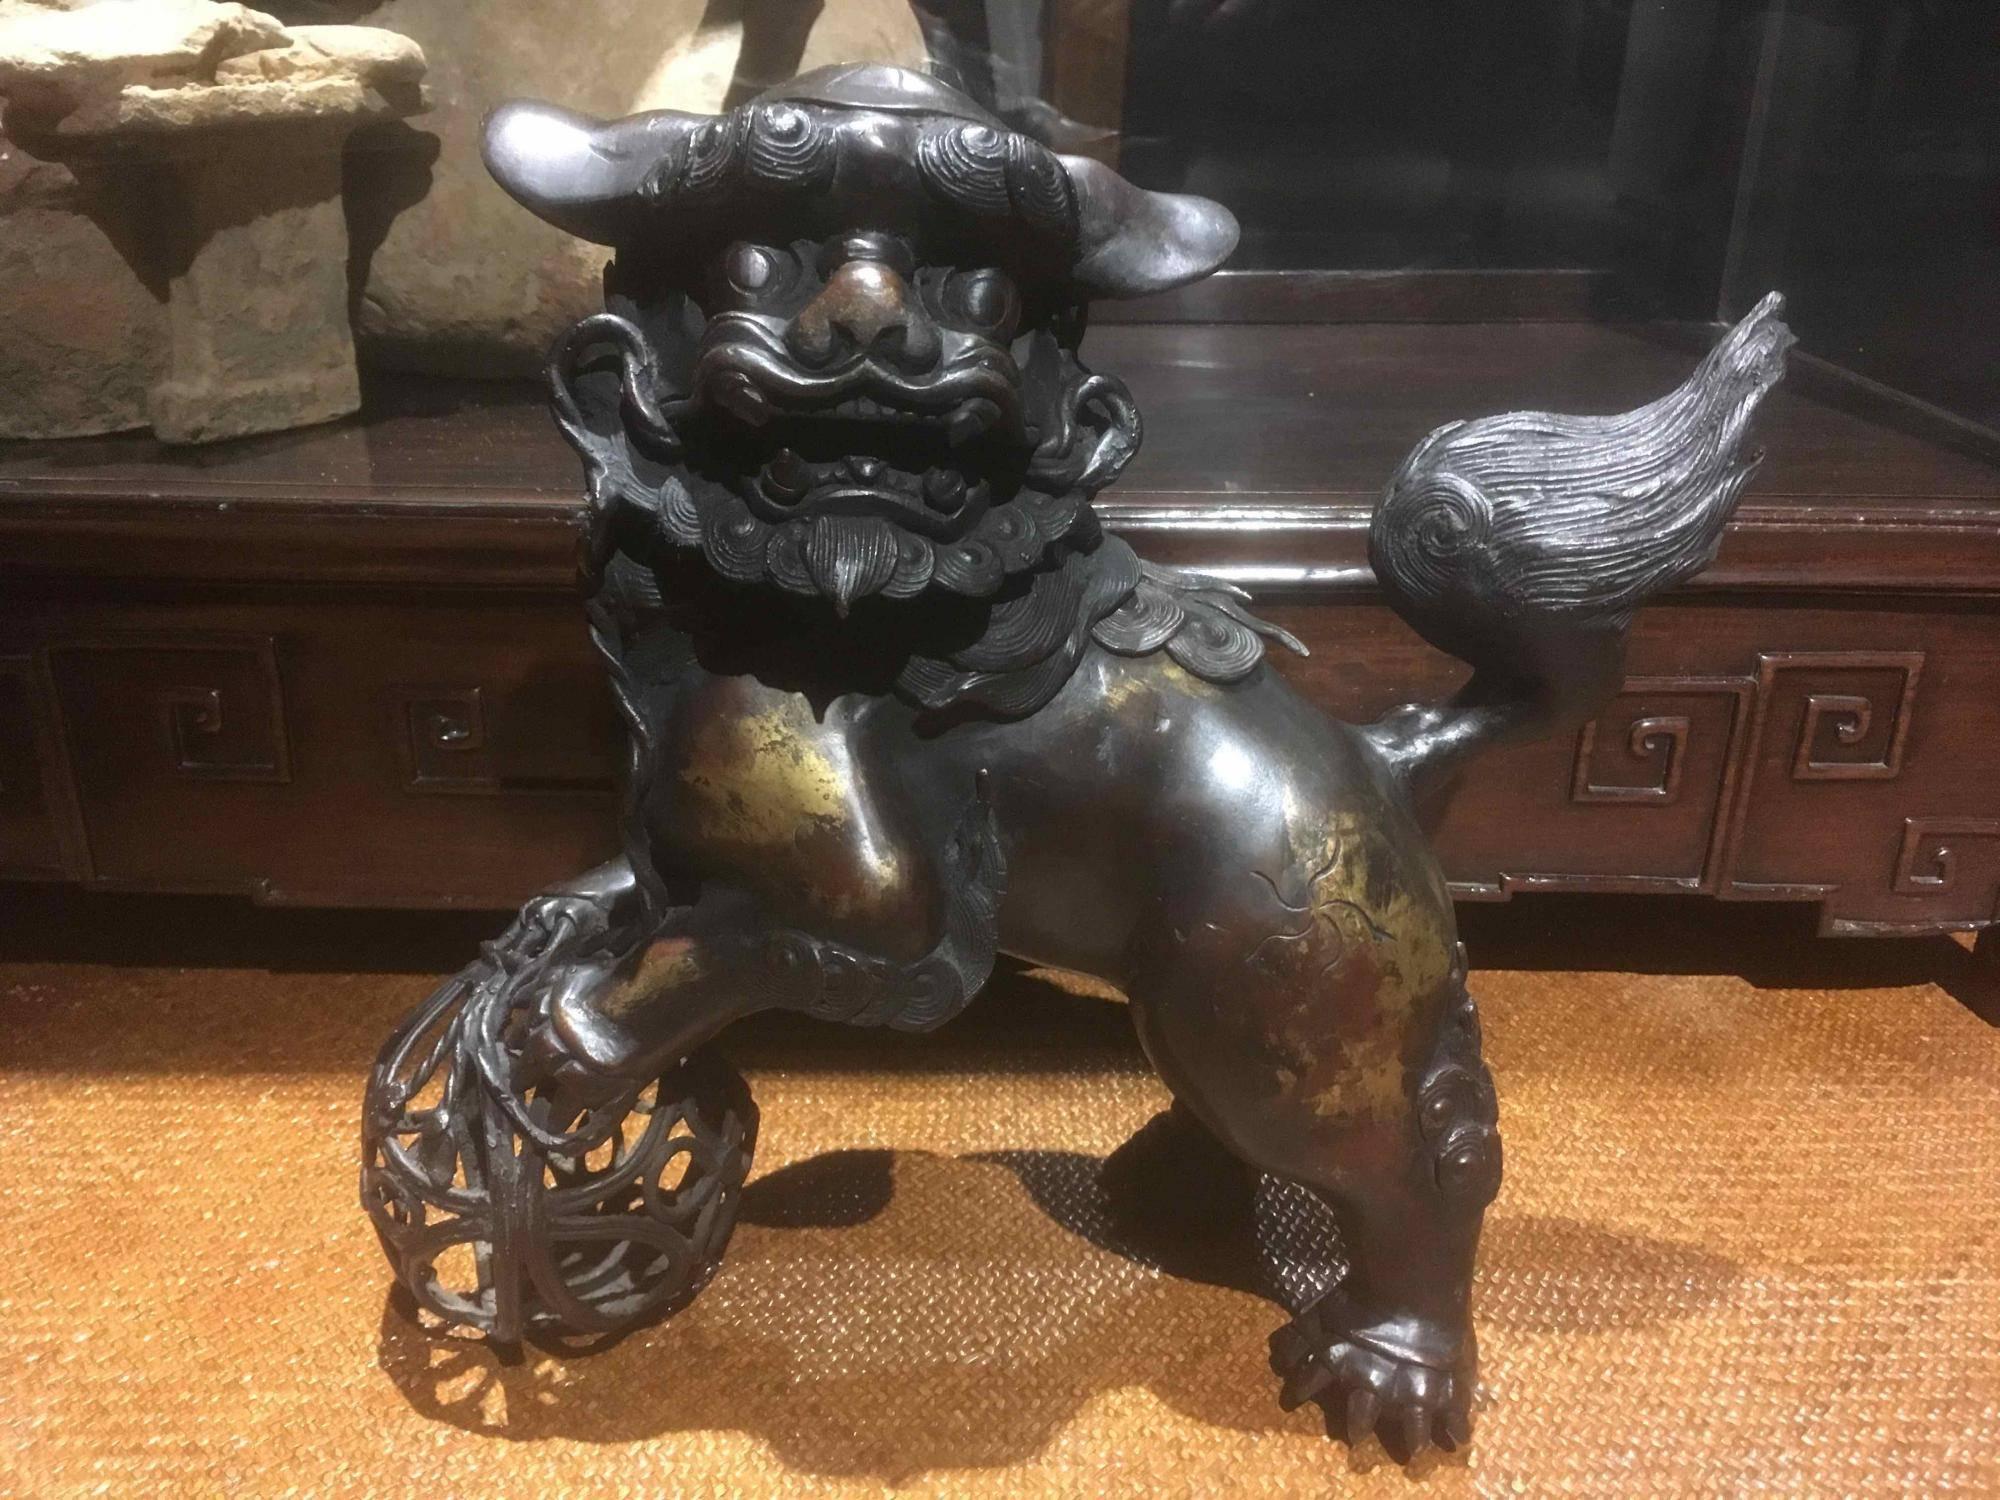 This lion dog is an incensor, where incense was inserted and burned inside. There is a door that opens on the back of the dog for the incense. The shish lion dog is a protector, often seen at entrances to protect the people within. 

Material: